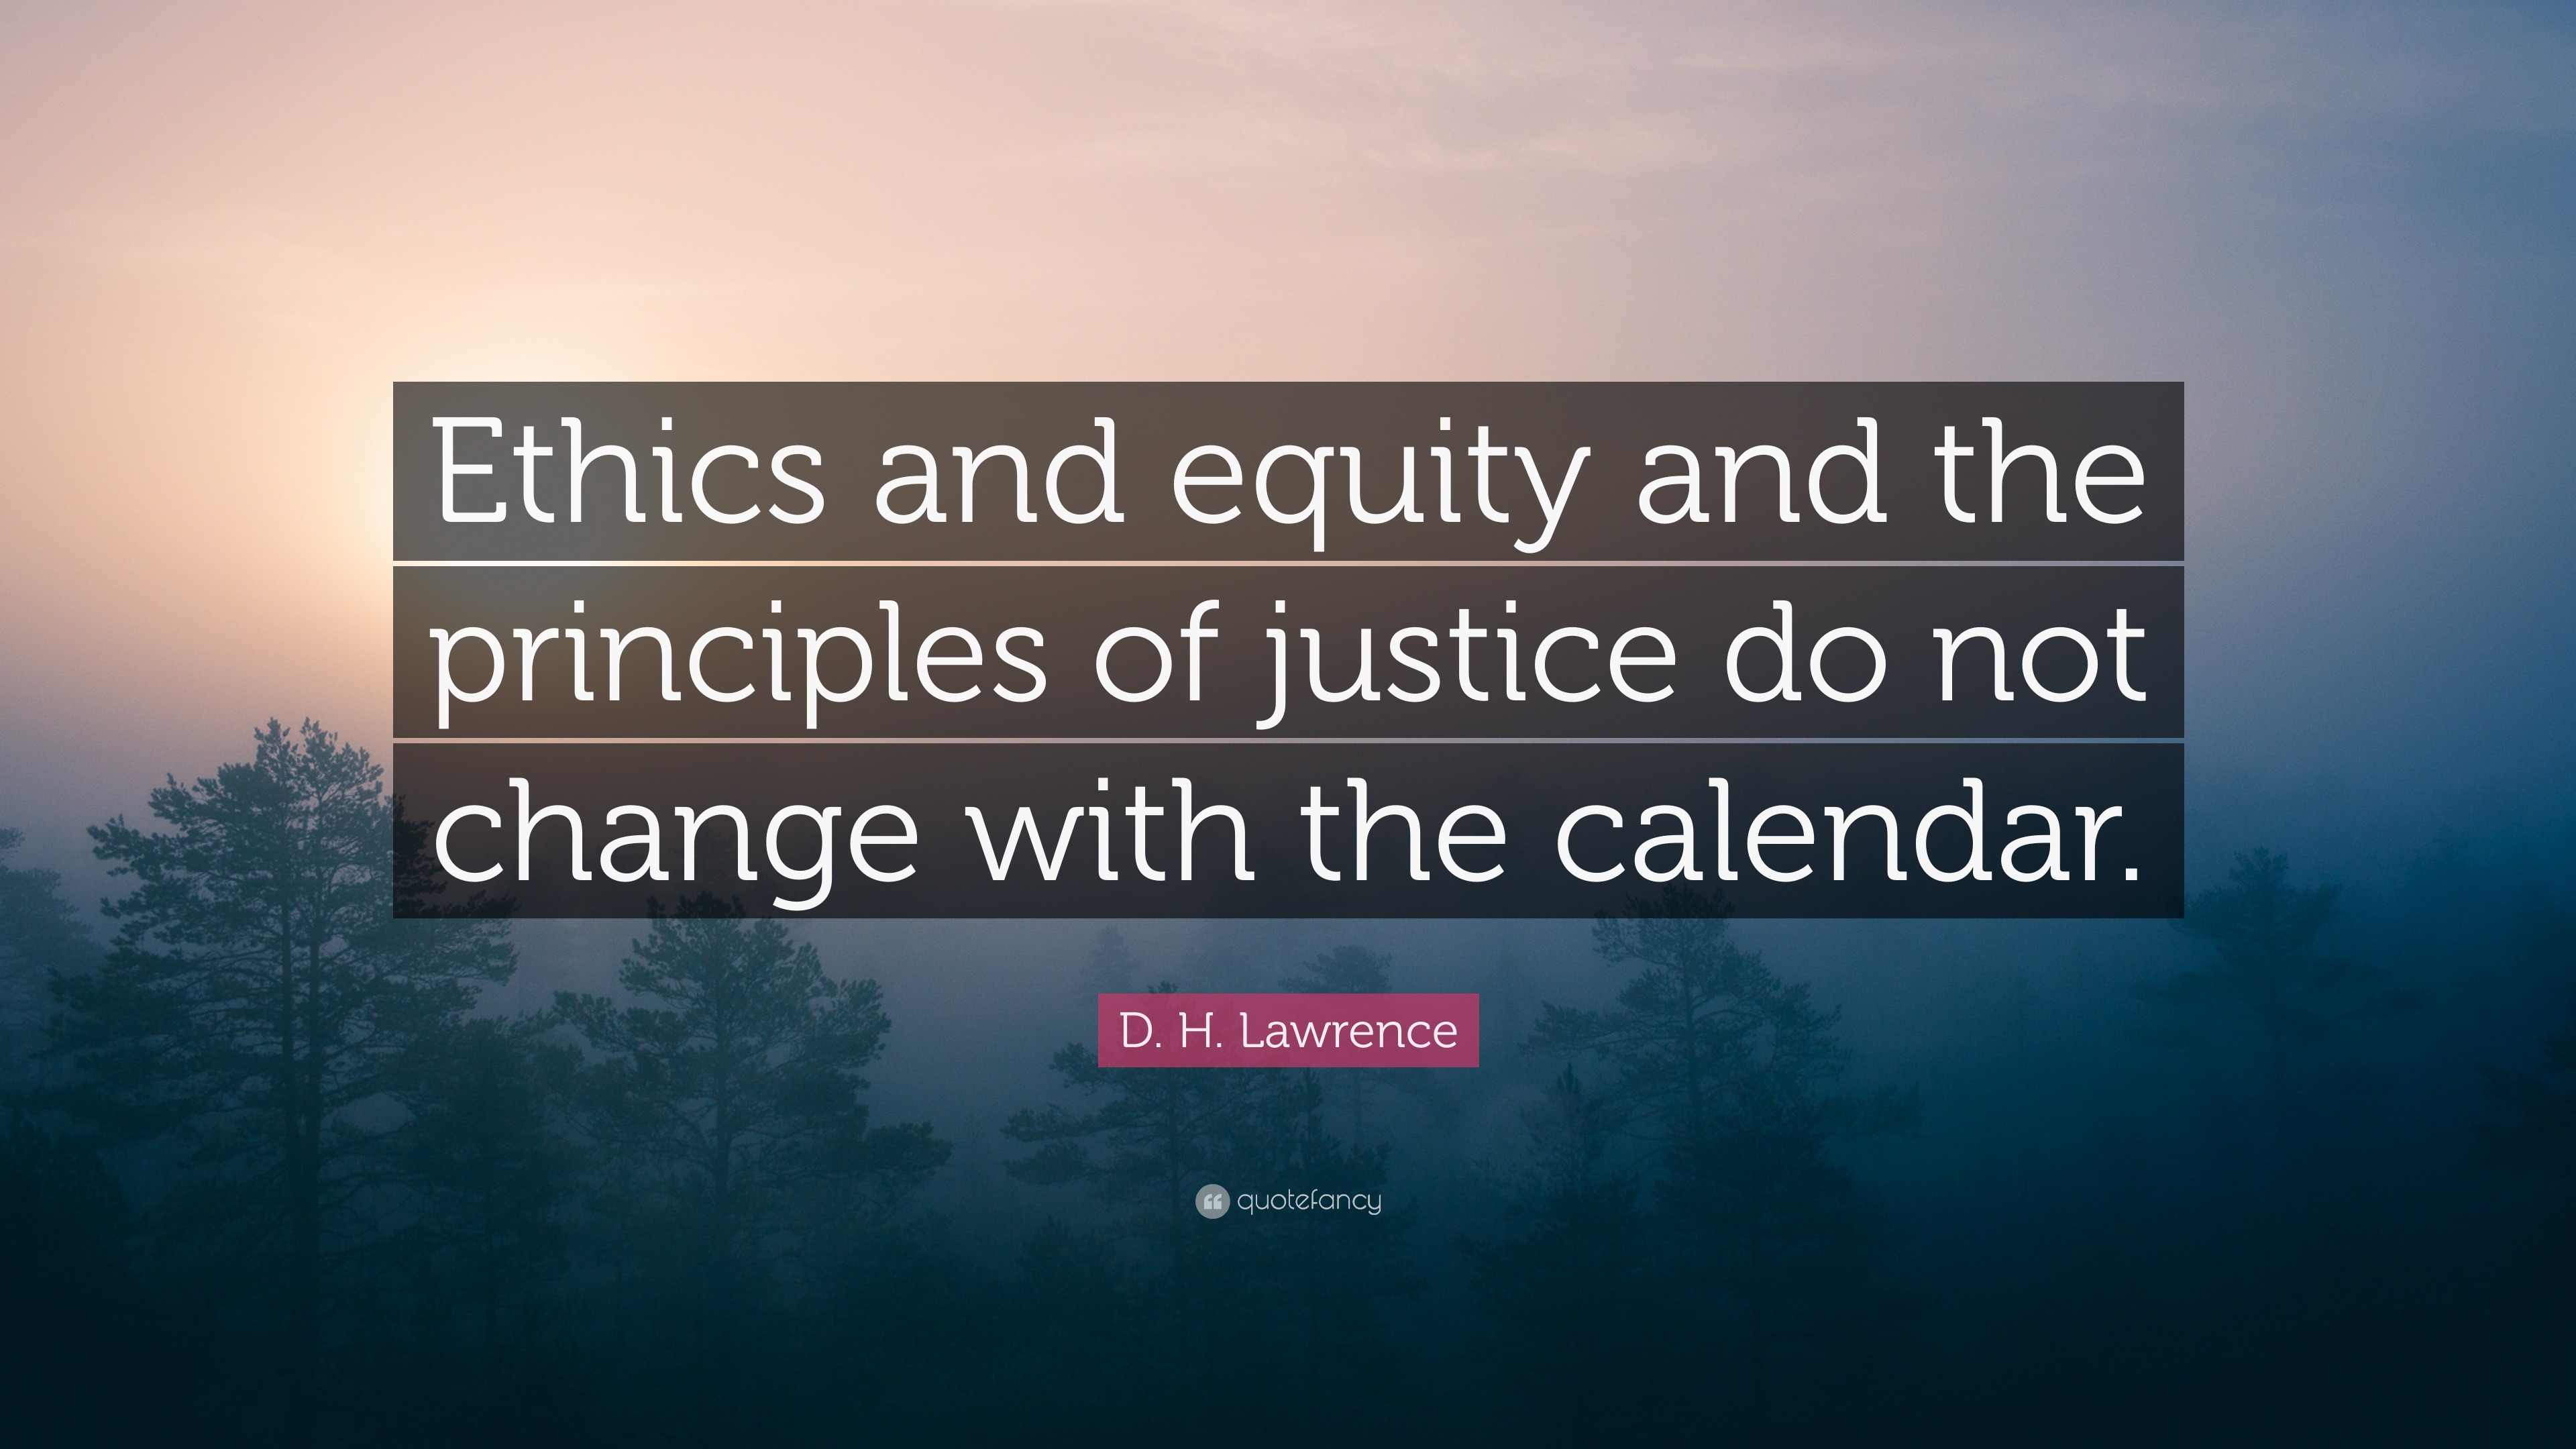 D. H. Lawrence Quote: “Ethics and equity and the principles of justice